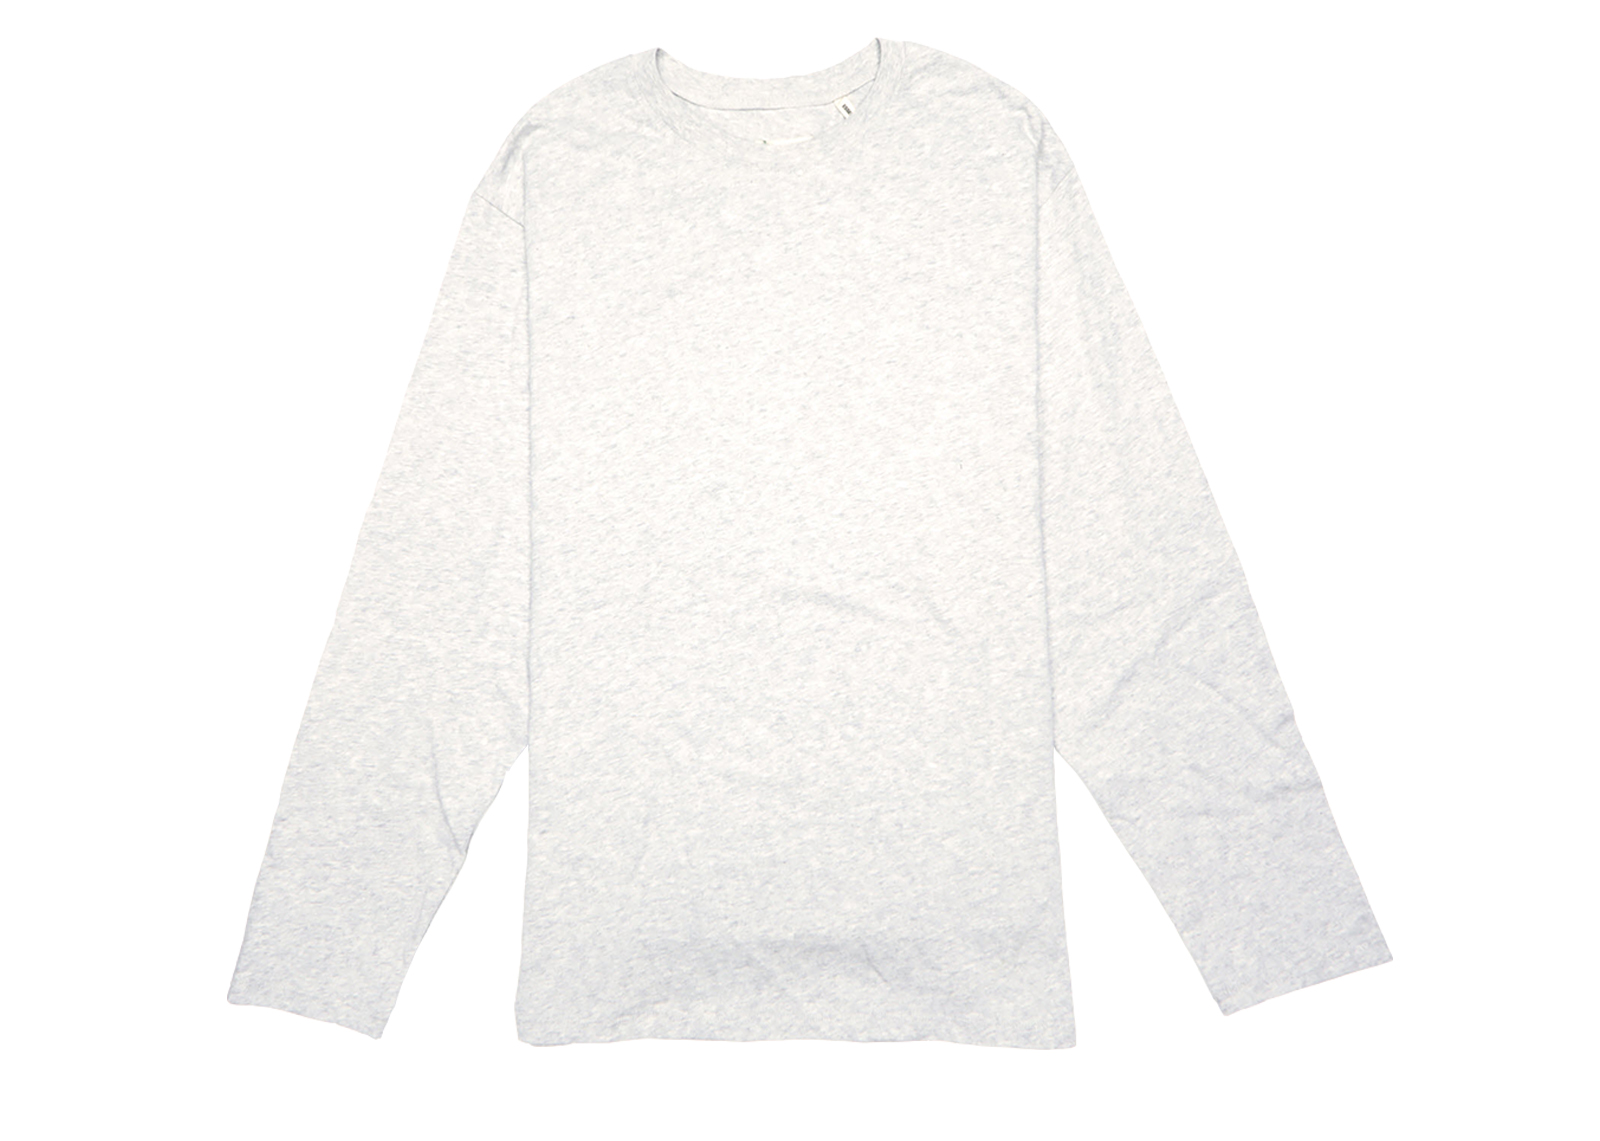 FEAR OF GOD Essentials Boxy Graphic Long Sleeve T-shirt Grey 